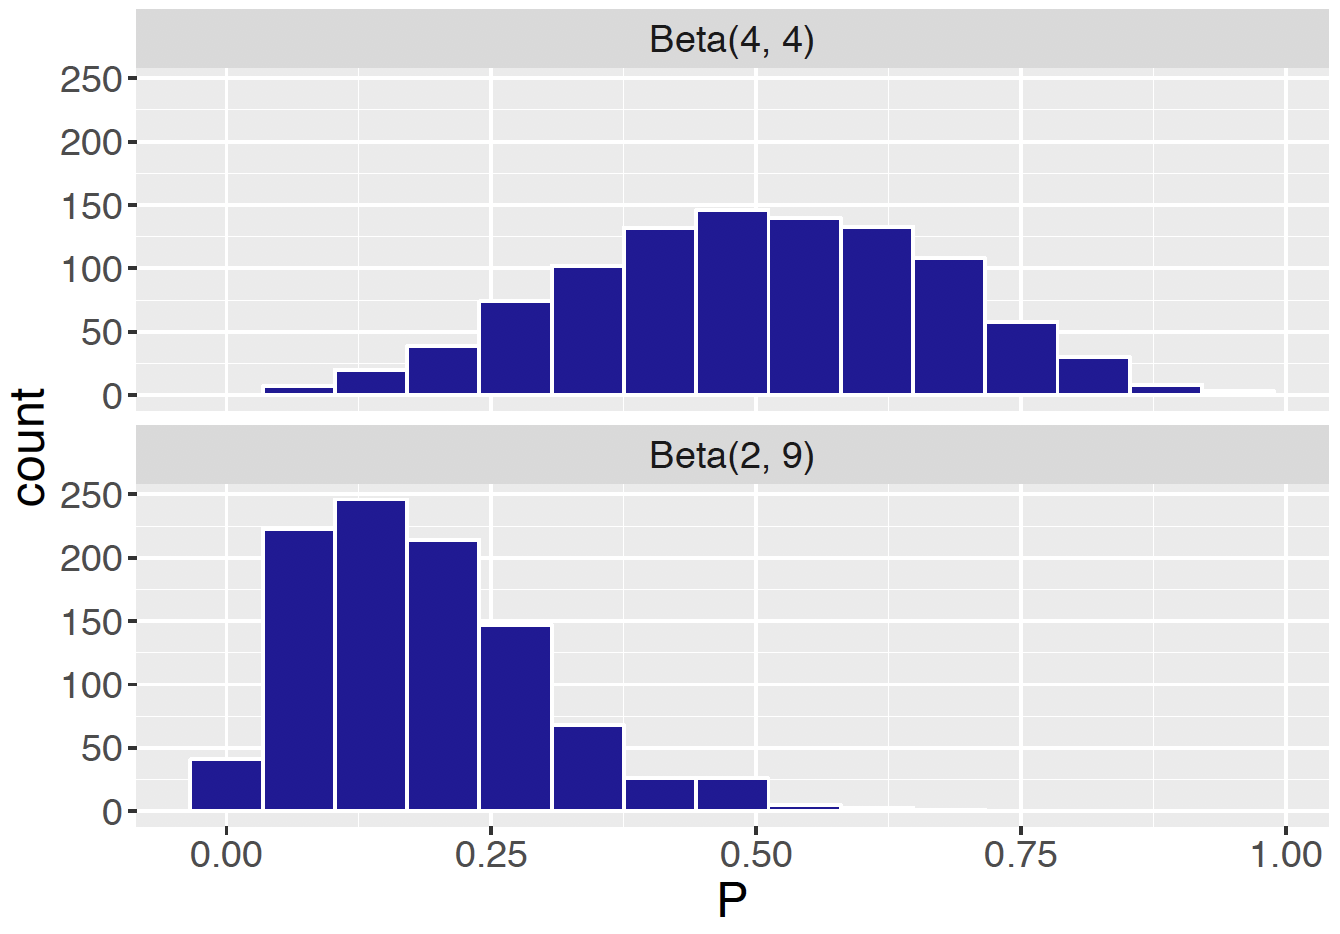 Histograms of 1000 samples of two Beta density curves Beta(4, 4) and Beta(2, 9).